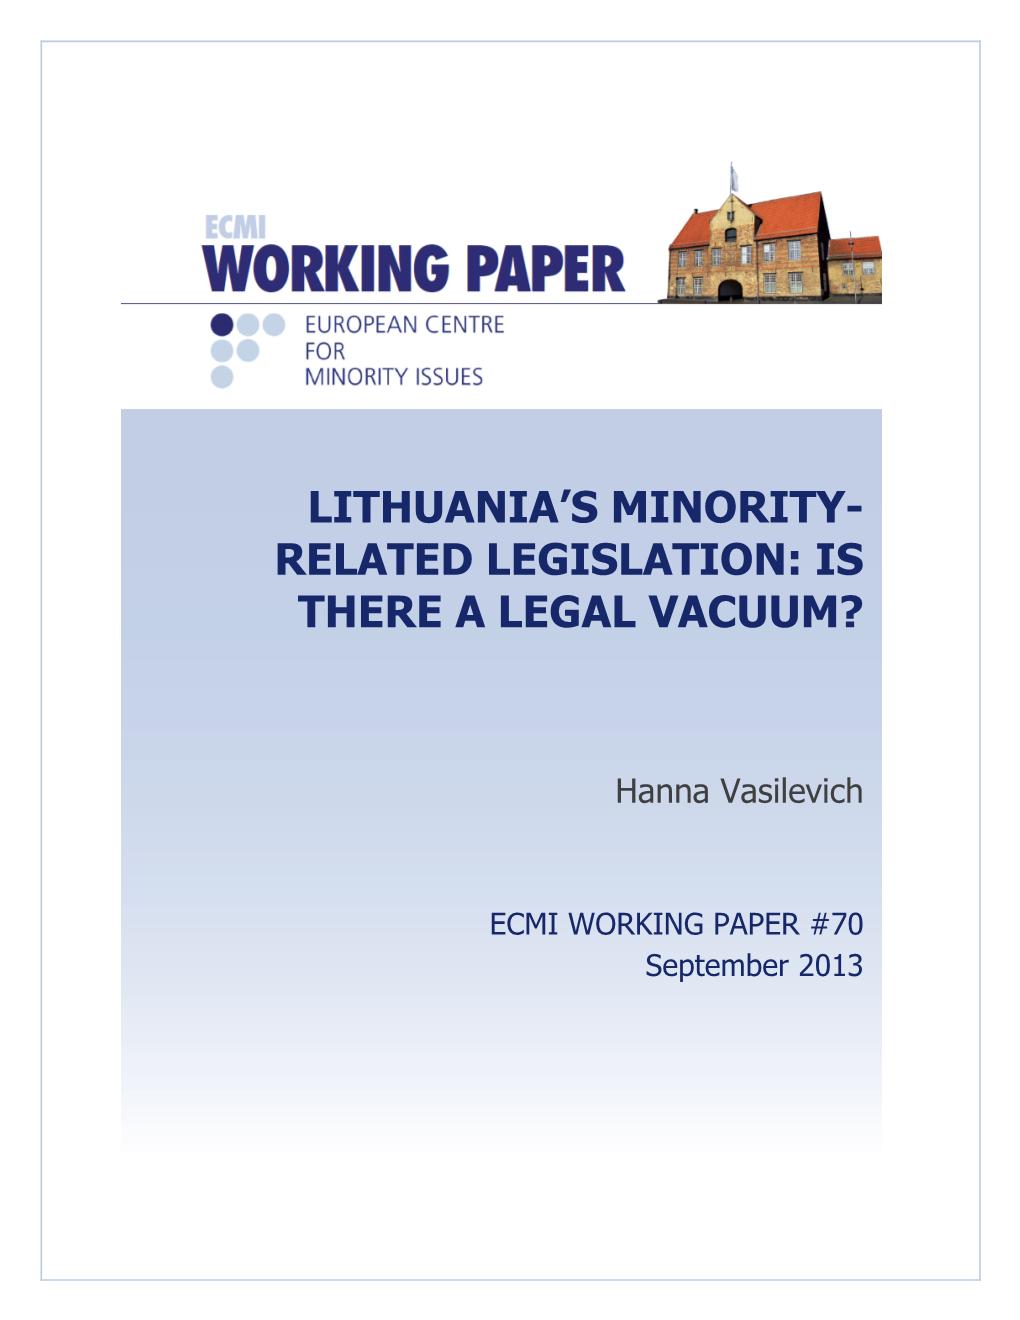 Lithuania's Minority-Related Legislation: Is There a Legal